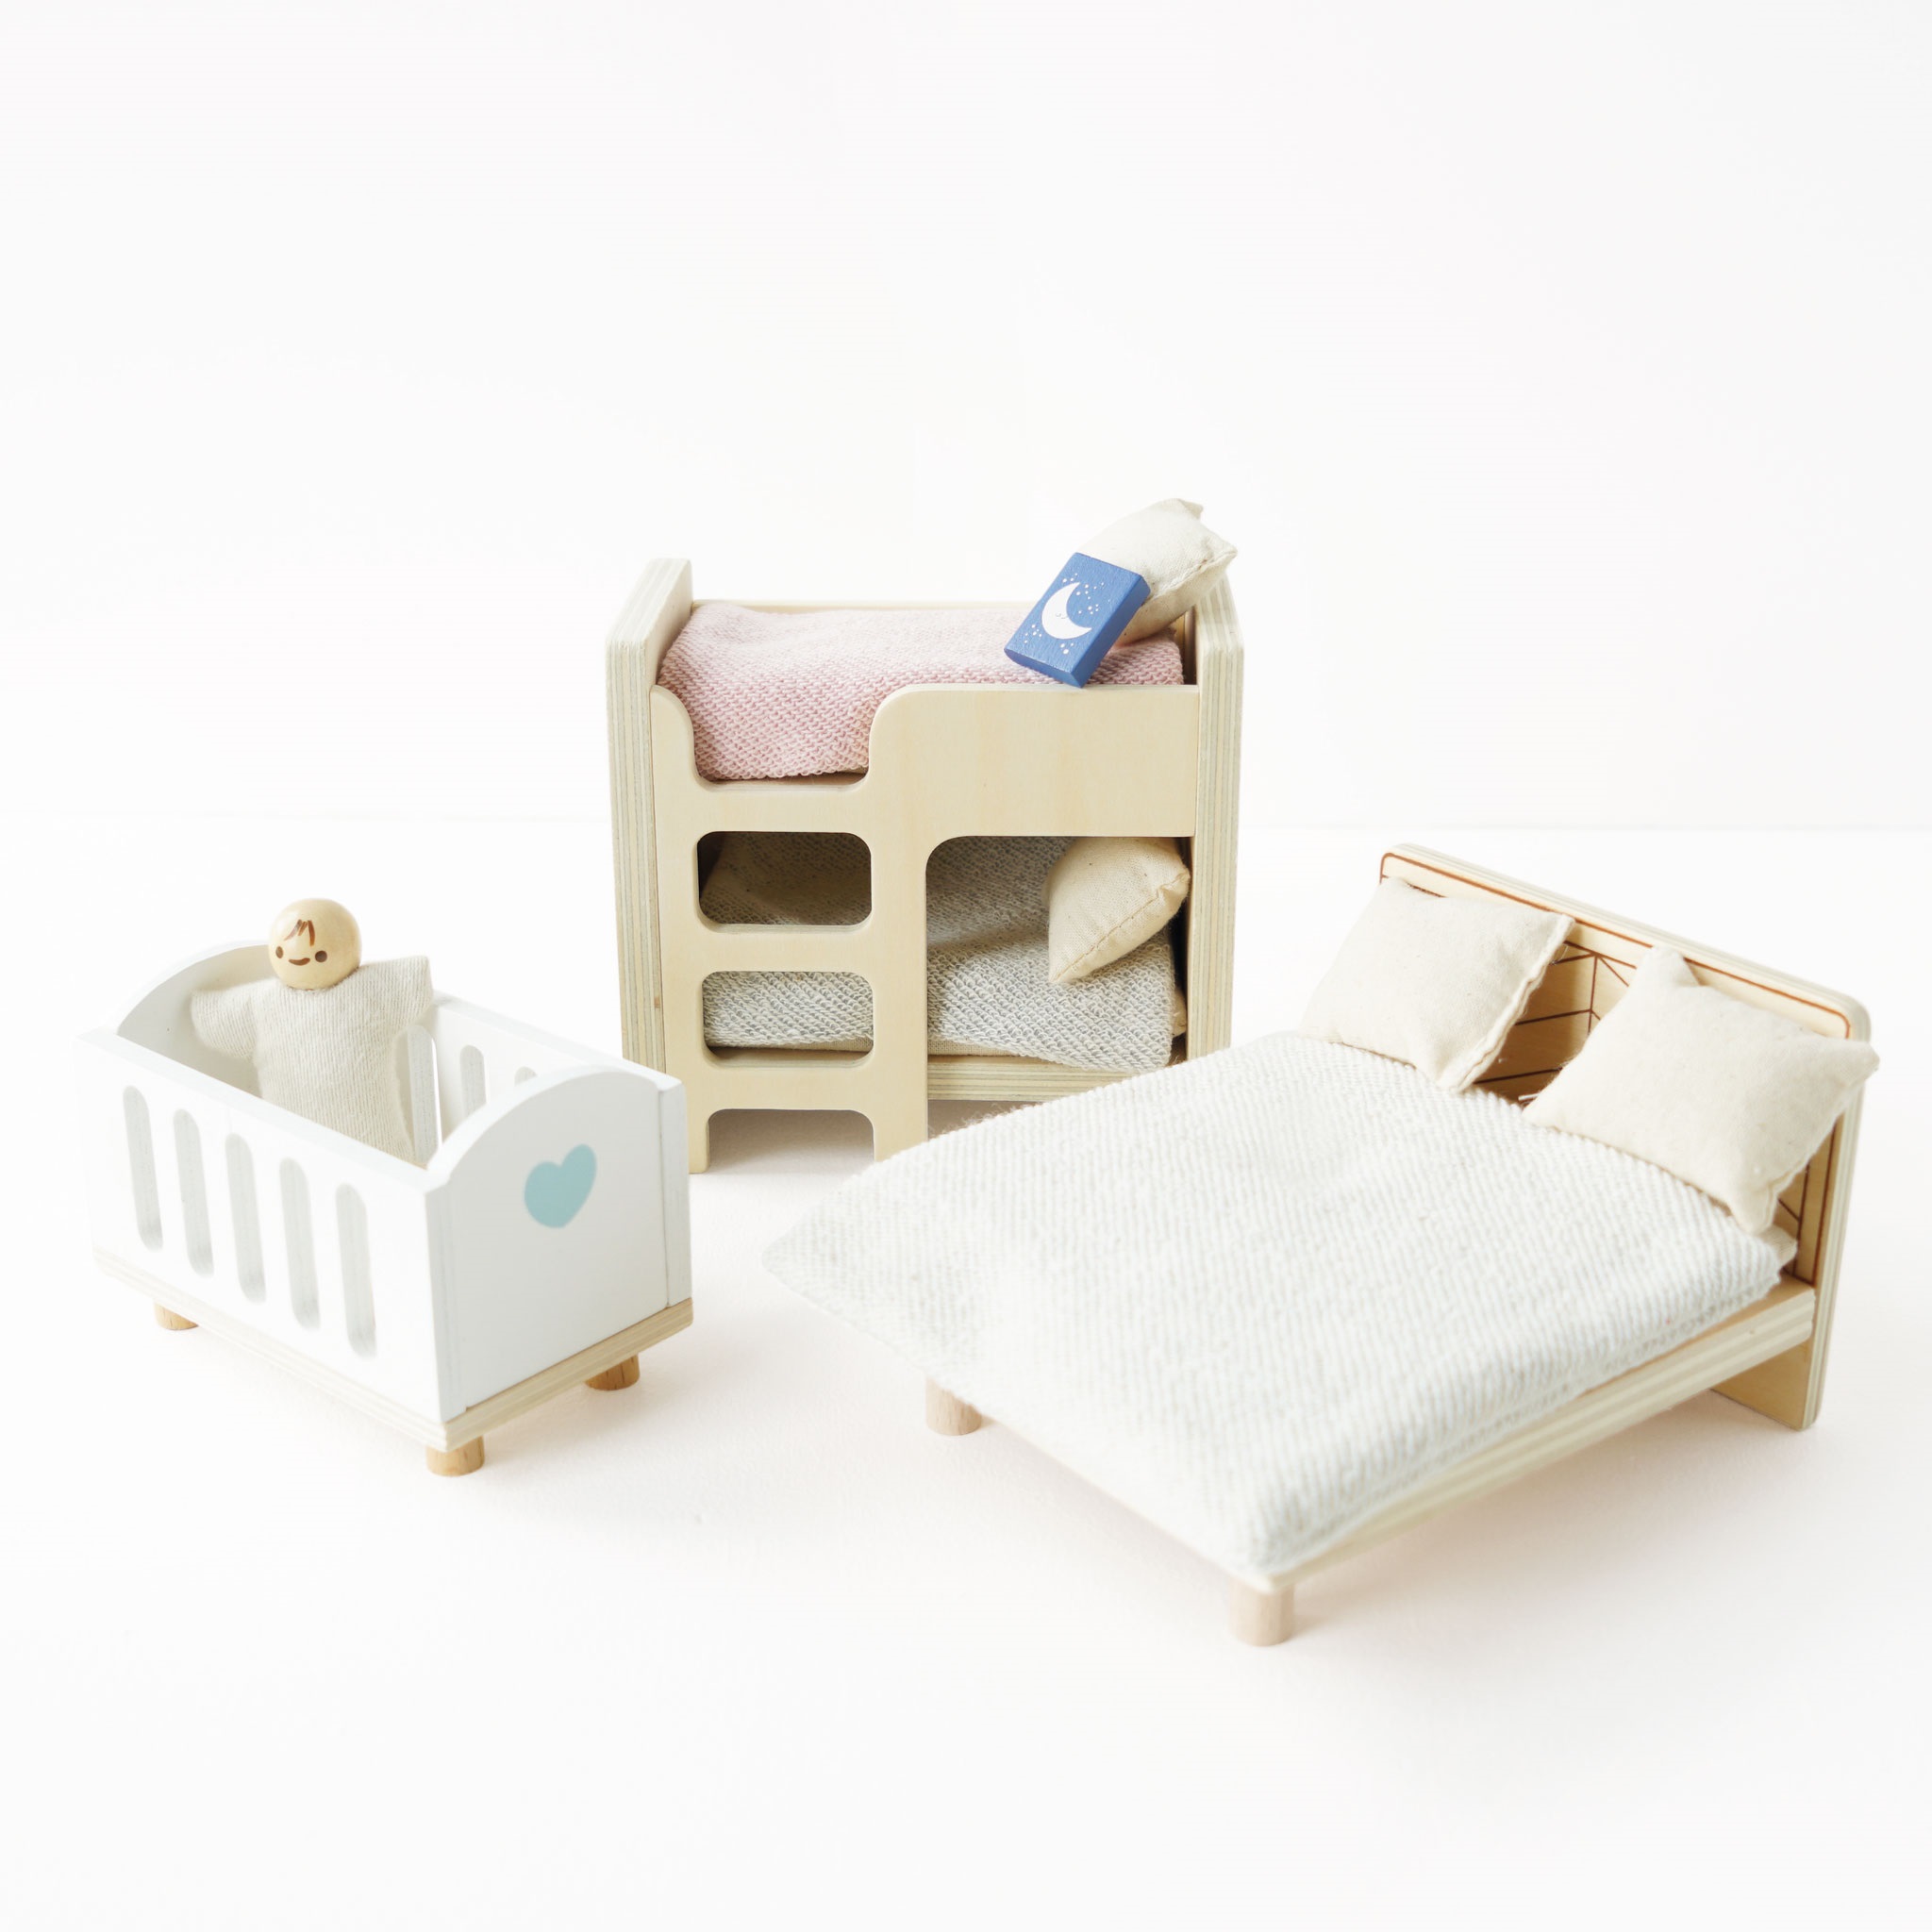 Doll House Furniture - Complete Set